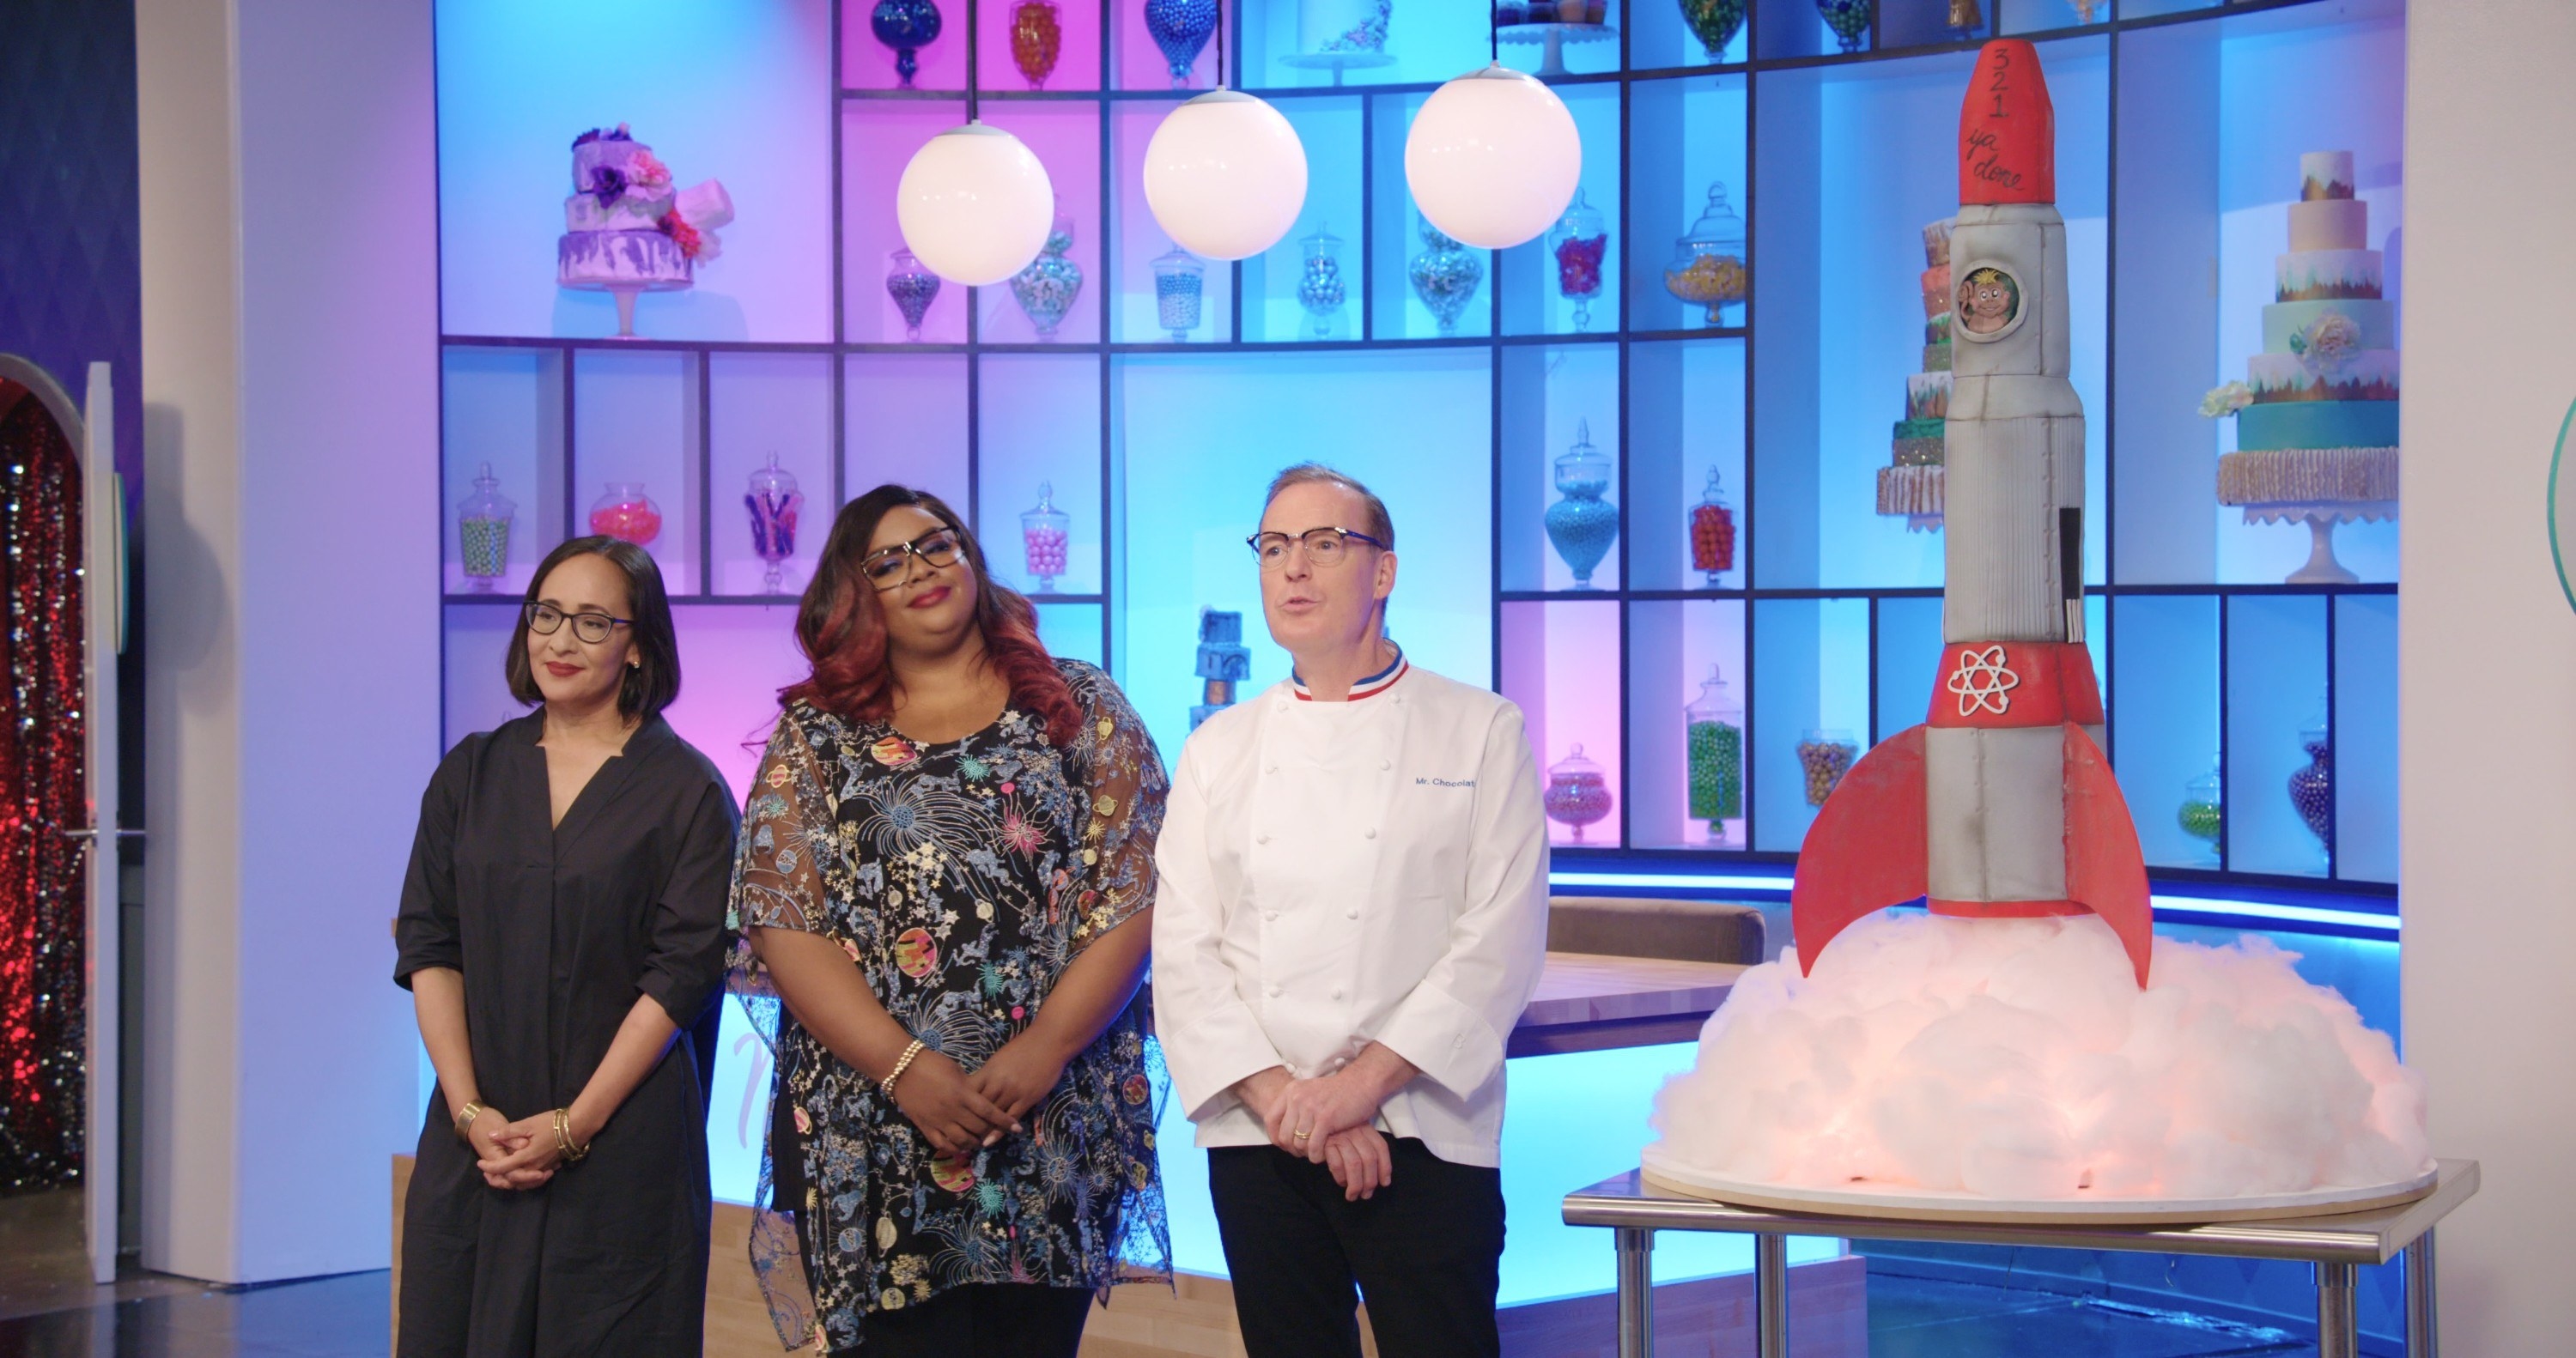 the judges of Nailed It next to a rocketship cake